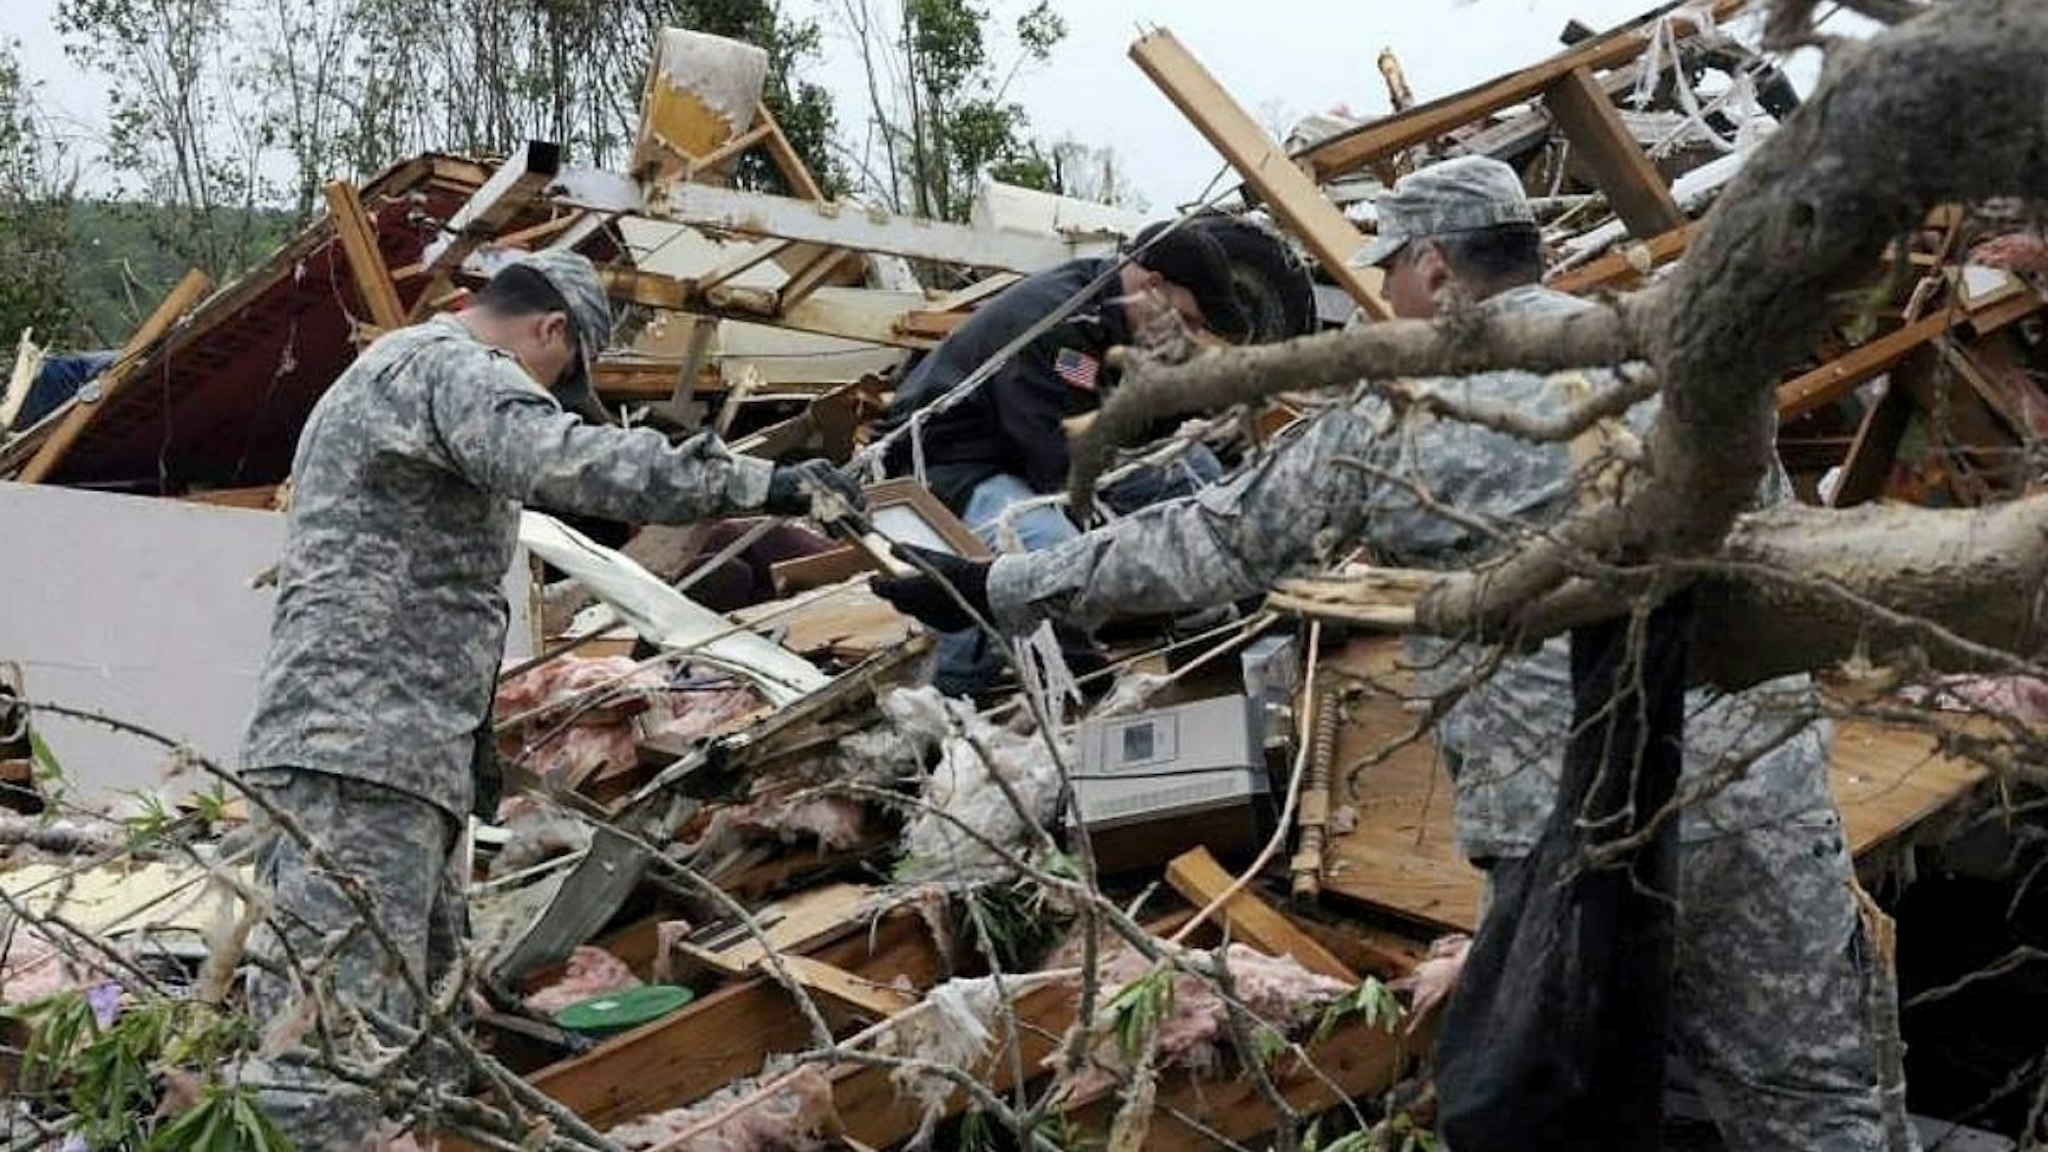 In this handout provided by the Arkansas National Guard, Arkansas National Guardsmen from the Conway based Special Troops Battalion, 39th Infantry Brigade Combat Team assist a family salvage heirlooms amongst the debris following a deadly tornado April 28, 2014 in Mayflower, Arkansas.